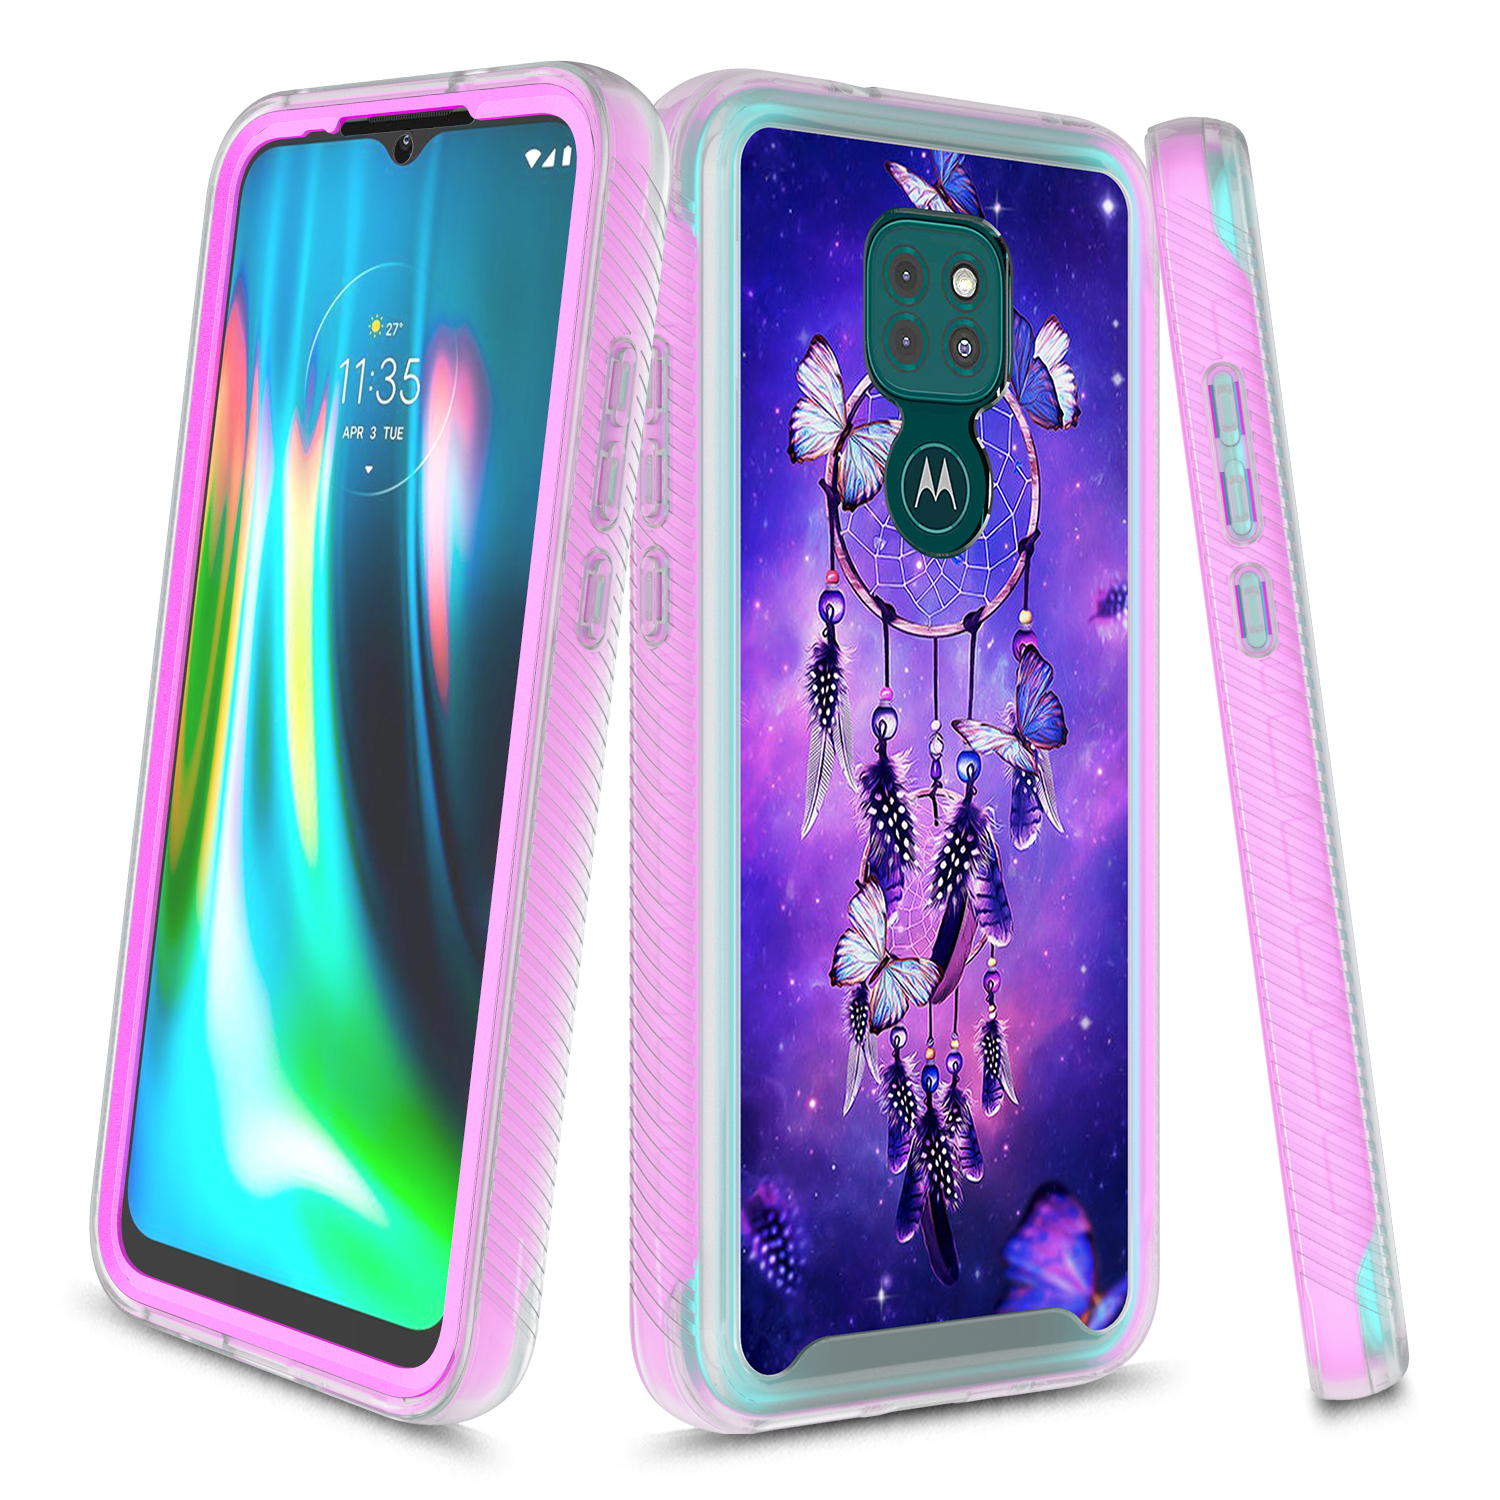 Moto G Play 2021 Case, Rosebono Graphic Design Shockproof Impact Resistant Protective Full-Body Rugged Clear Hybrid Bumper Case for Moto G Play 2021 (Dream Catcher) - image 1 of 4